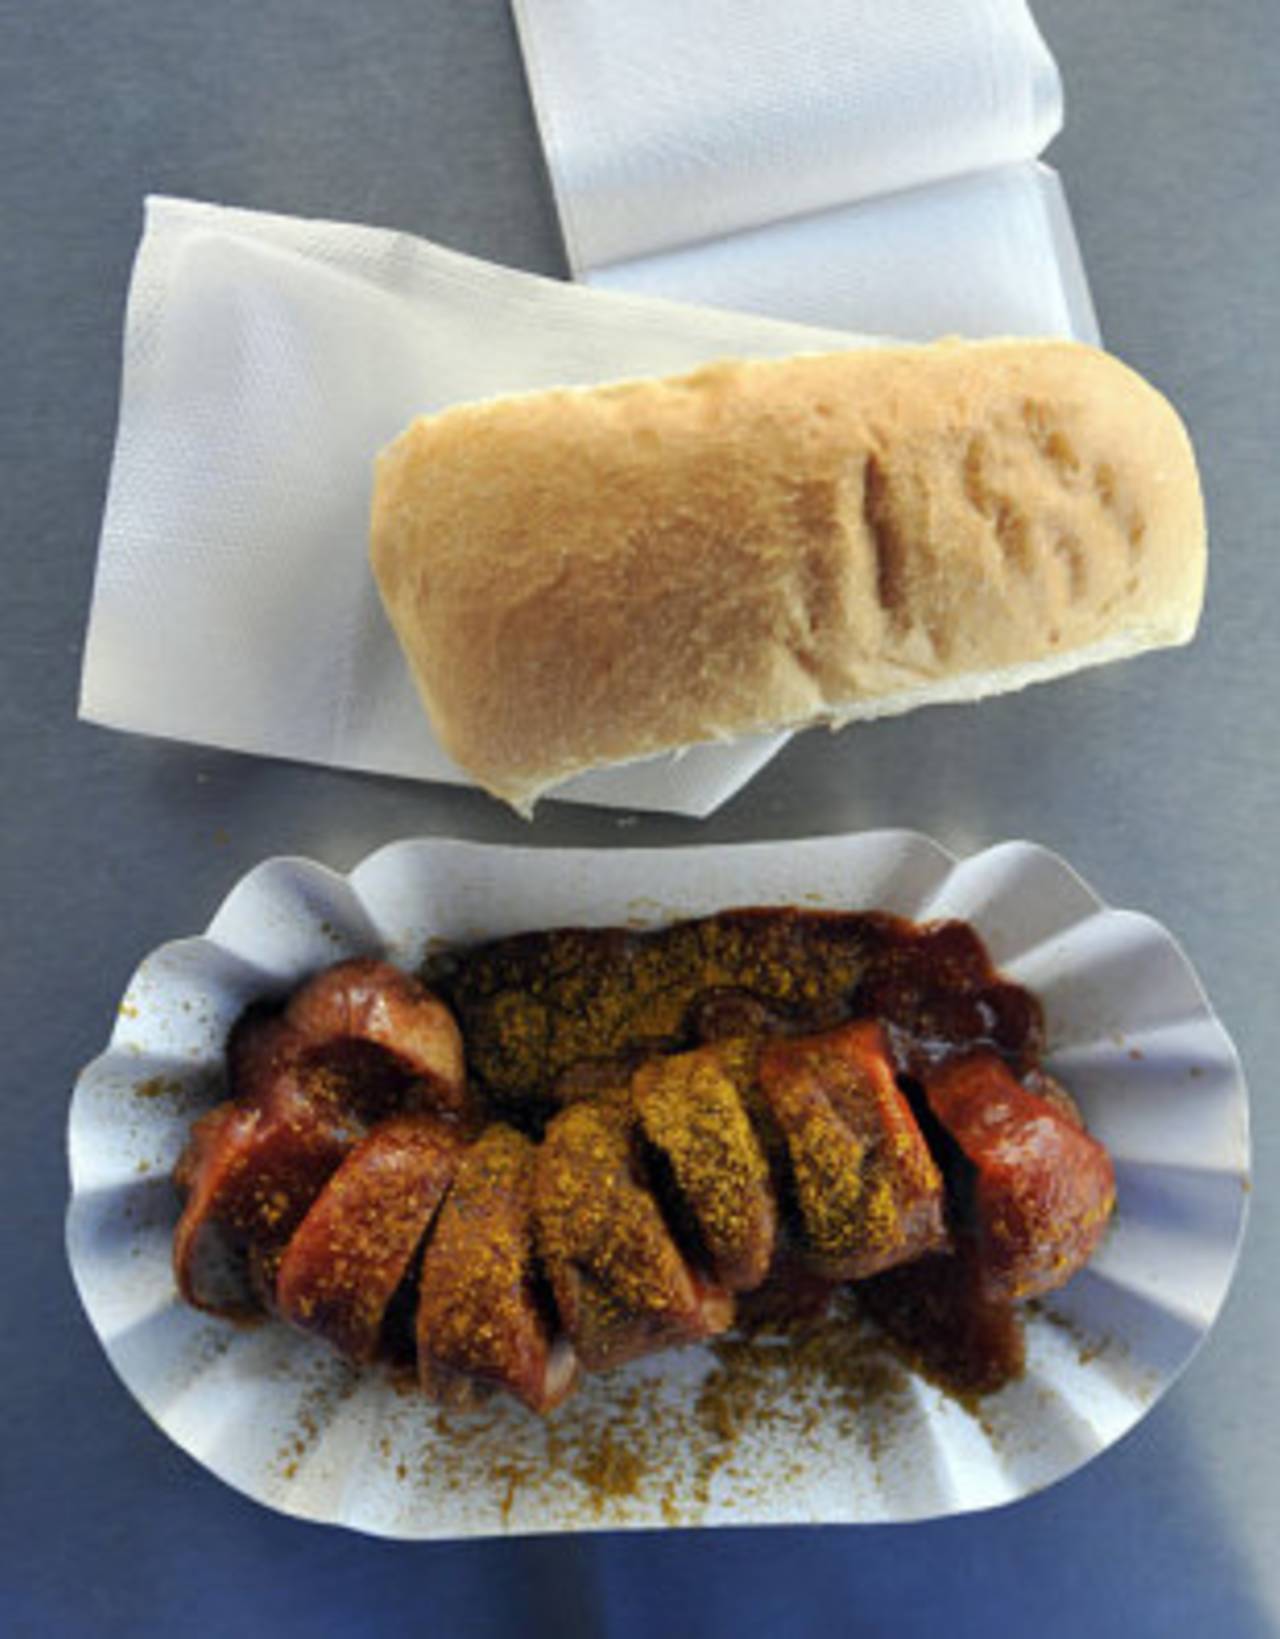 A currywurst sausage, Berlin, January 19, 2009